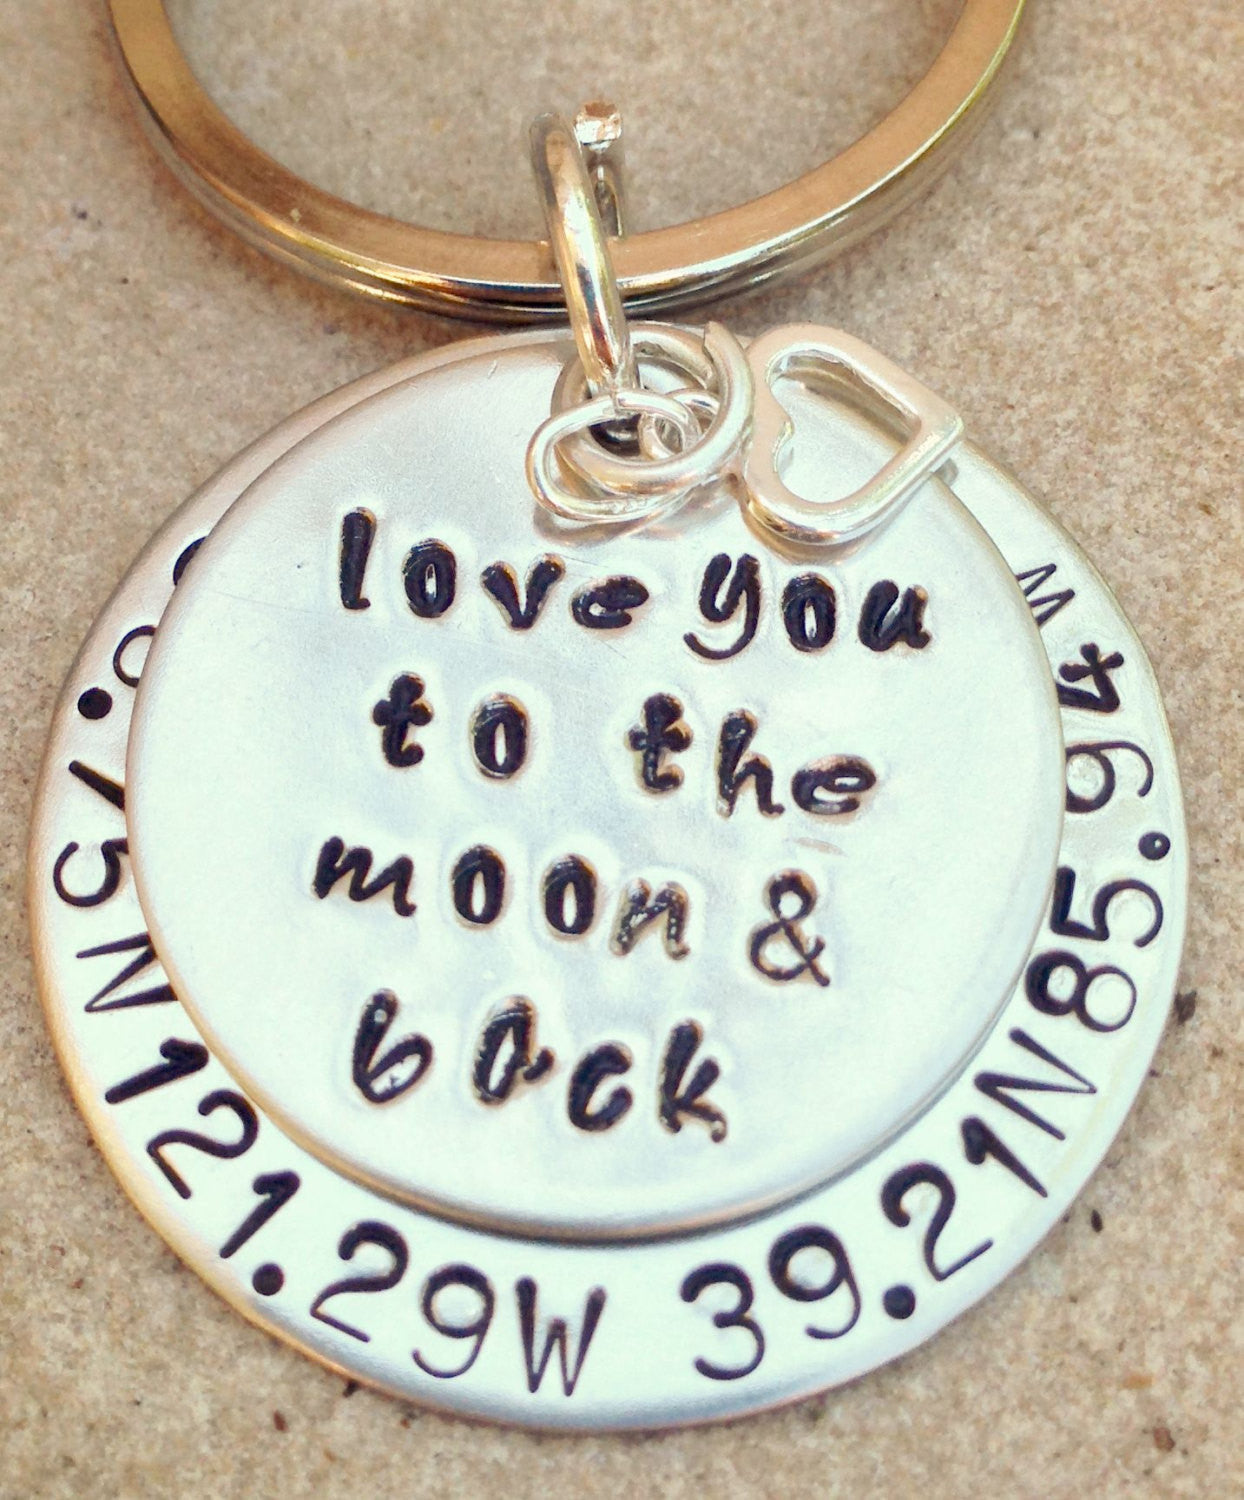 Father Gift, Boyfriend  Gift, keychain, key chain, love you to the moon and back, coordinate keychain, gifts for men, natashaaloha - Natashaaloha, jewelry, bracelets, necklace, keychains, fishing lures, gifts for men, charms, personalized, 